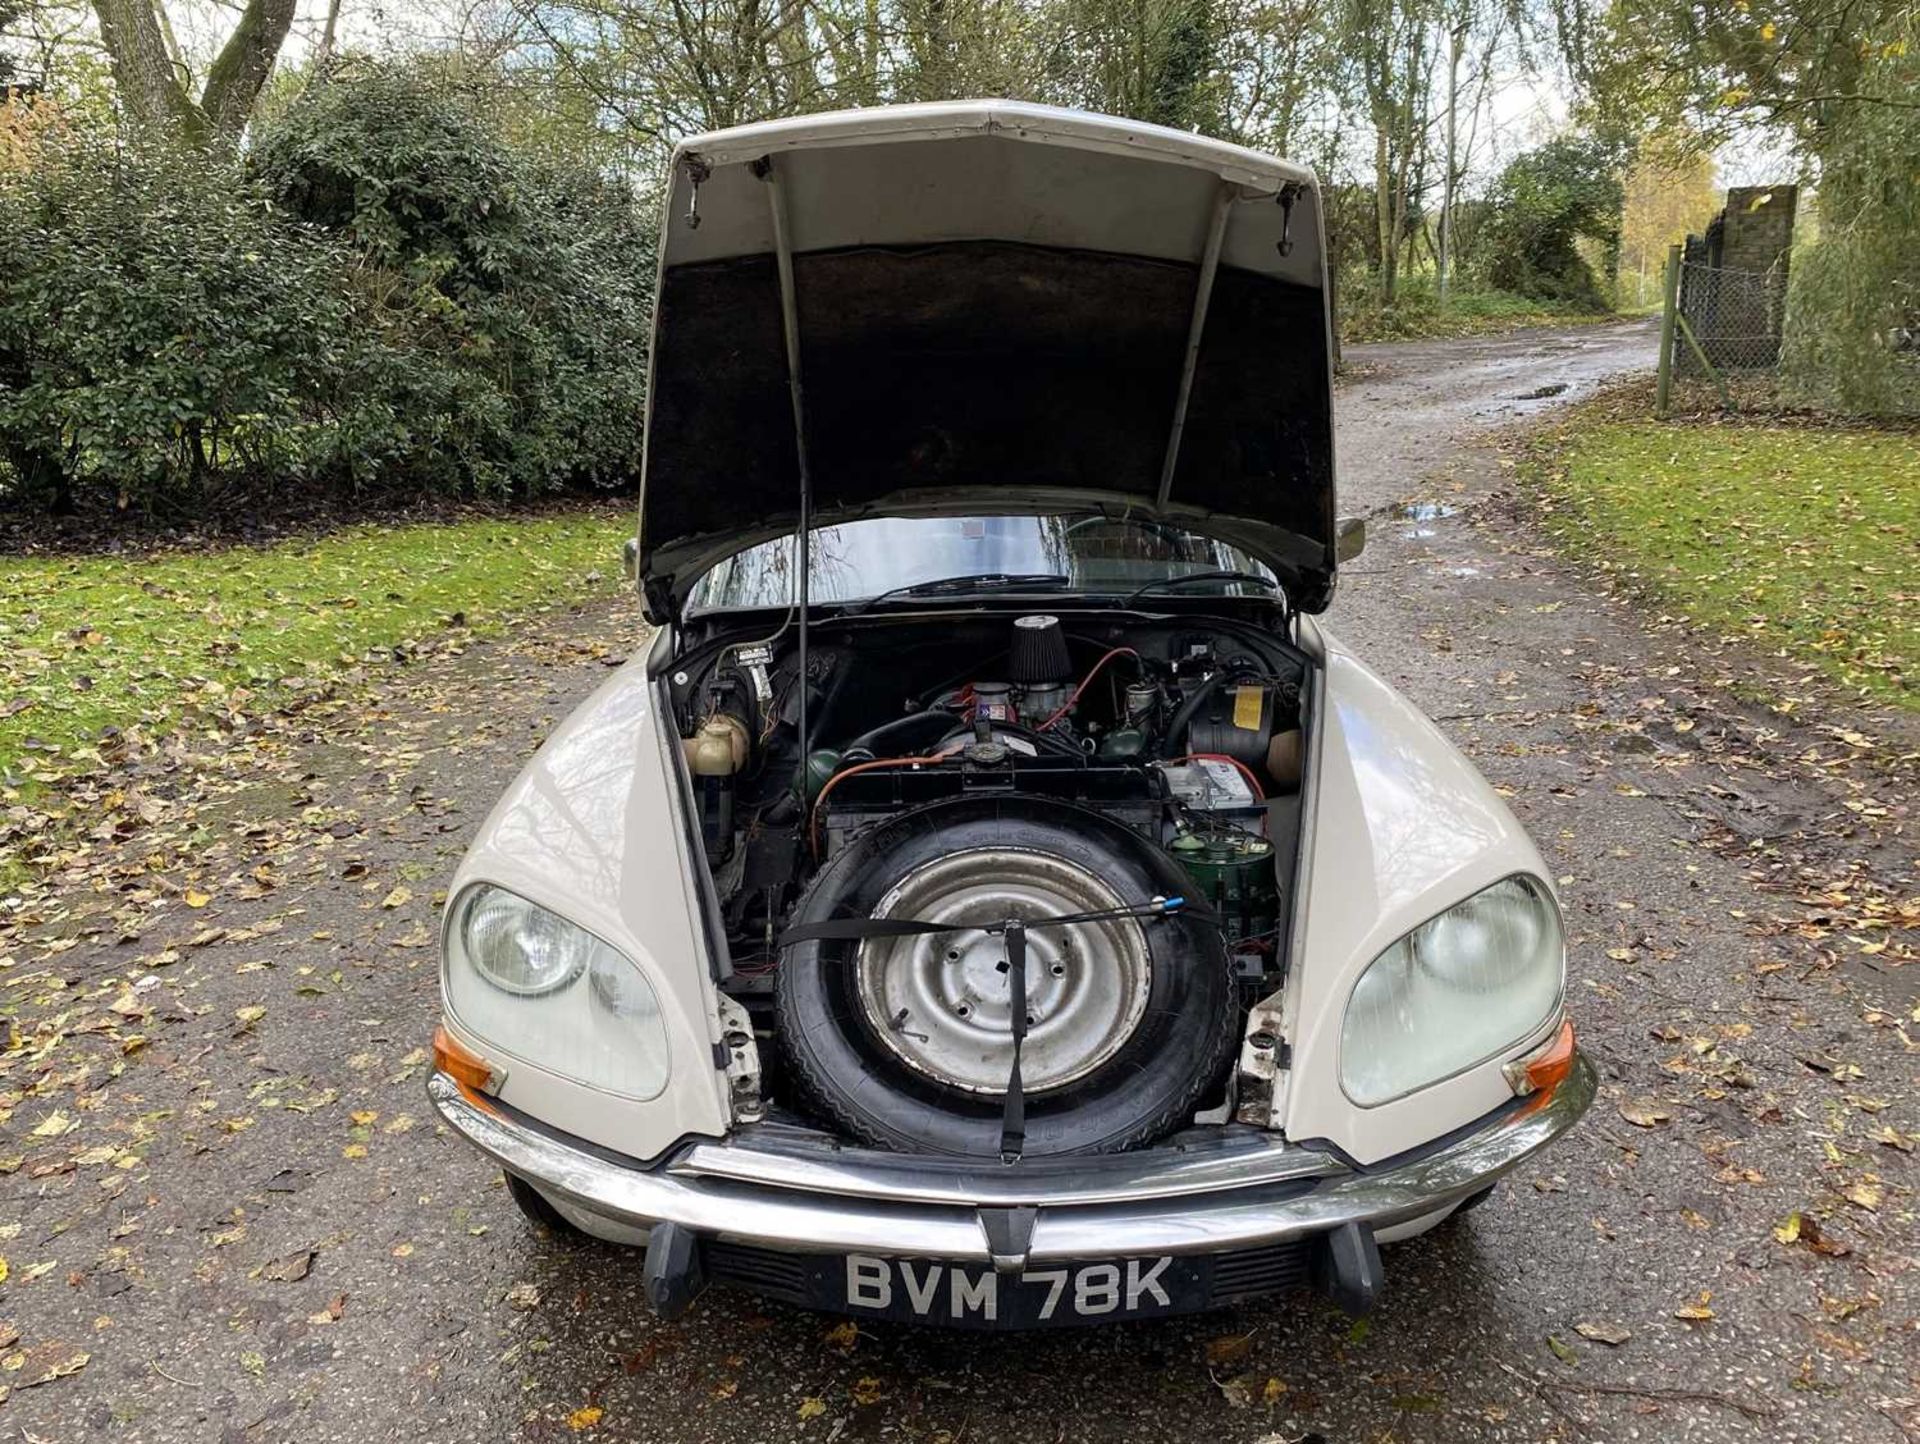 1971 Citroën DS21 Recently completed a 2,000 mile European grand tour - Image 18 of 100